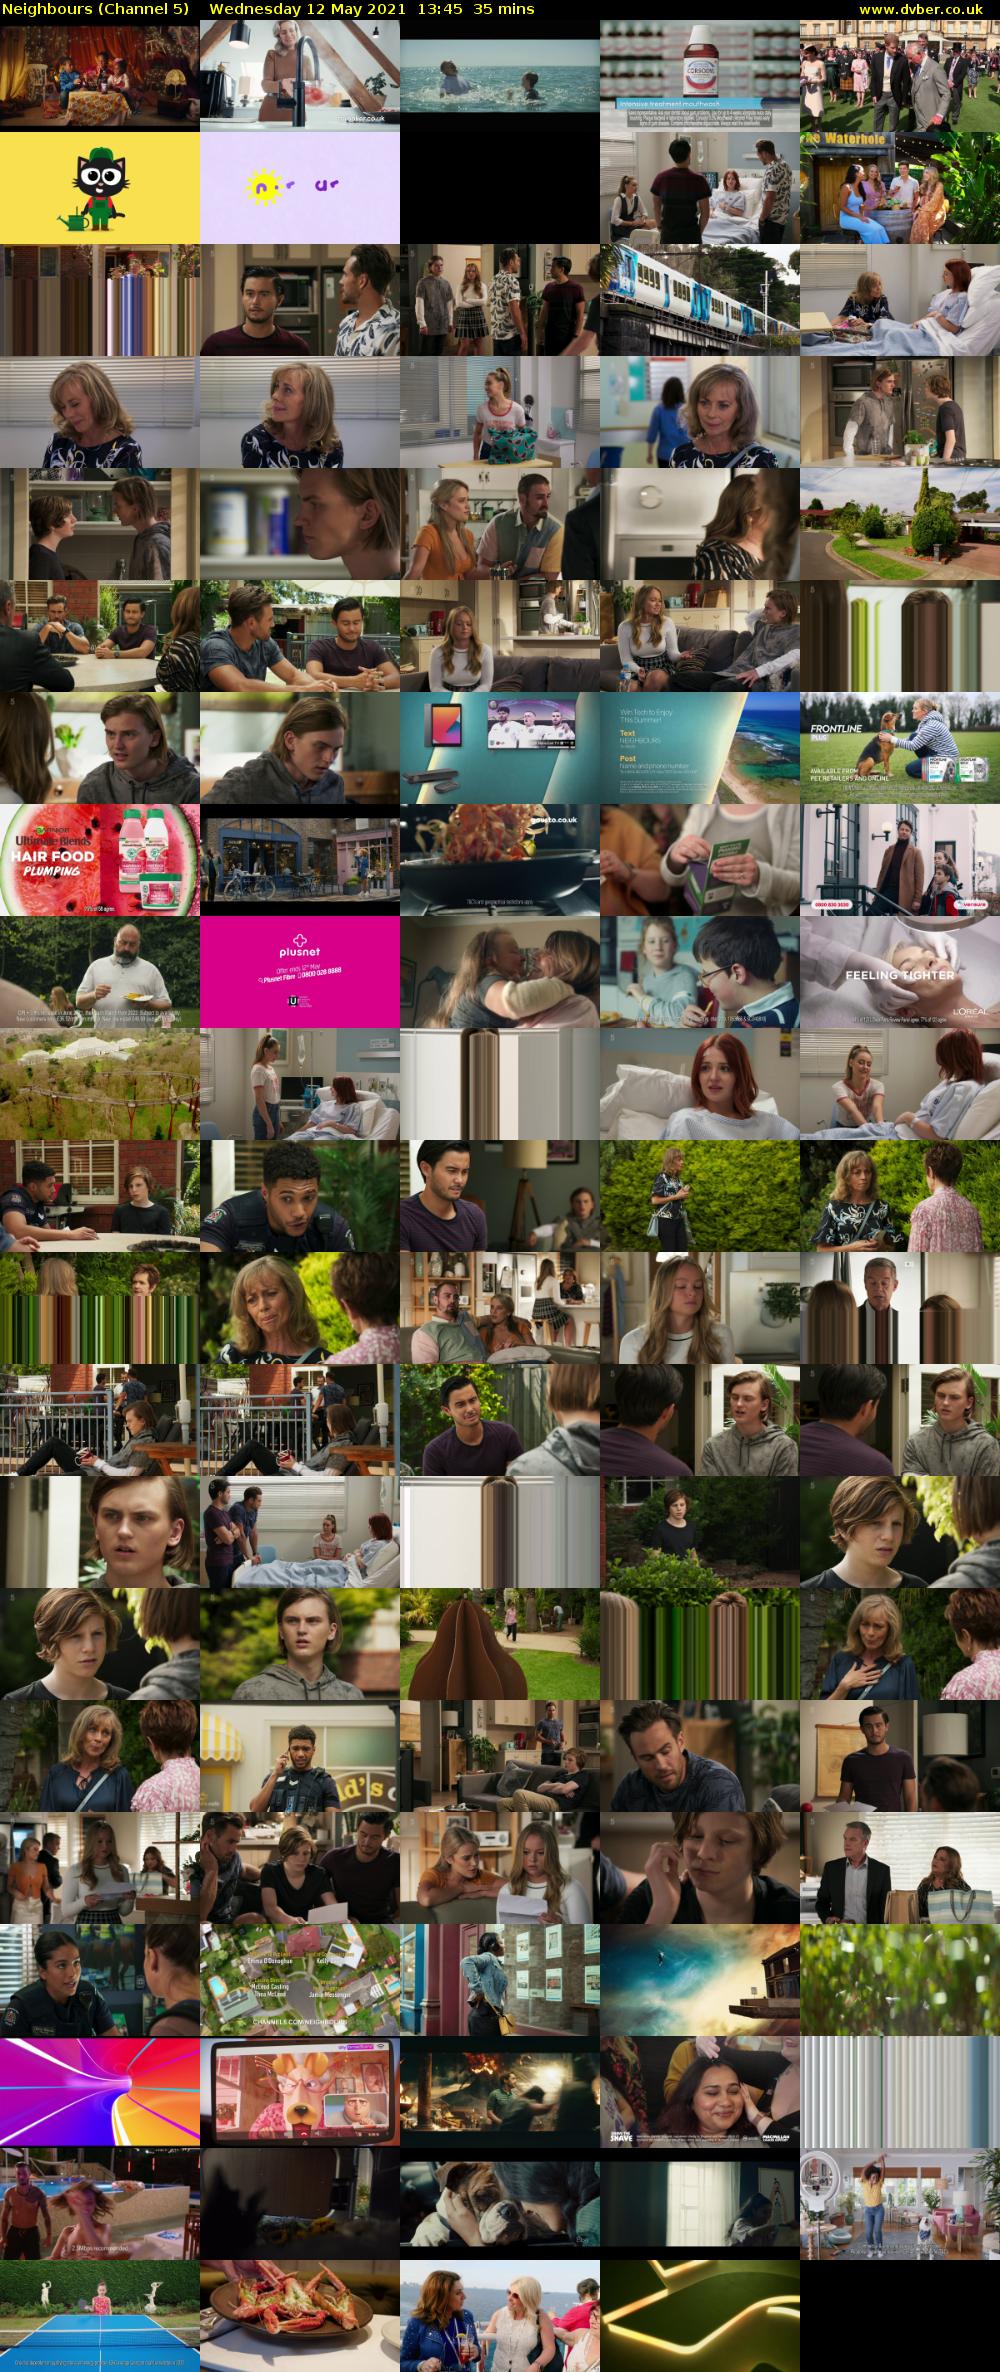 Neighbours (Channel 5) Wednesday 12 May 2021 13:45 - 14:20